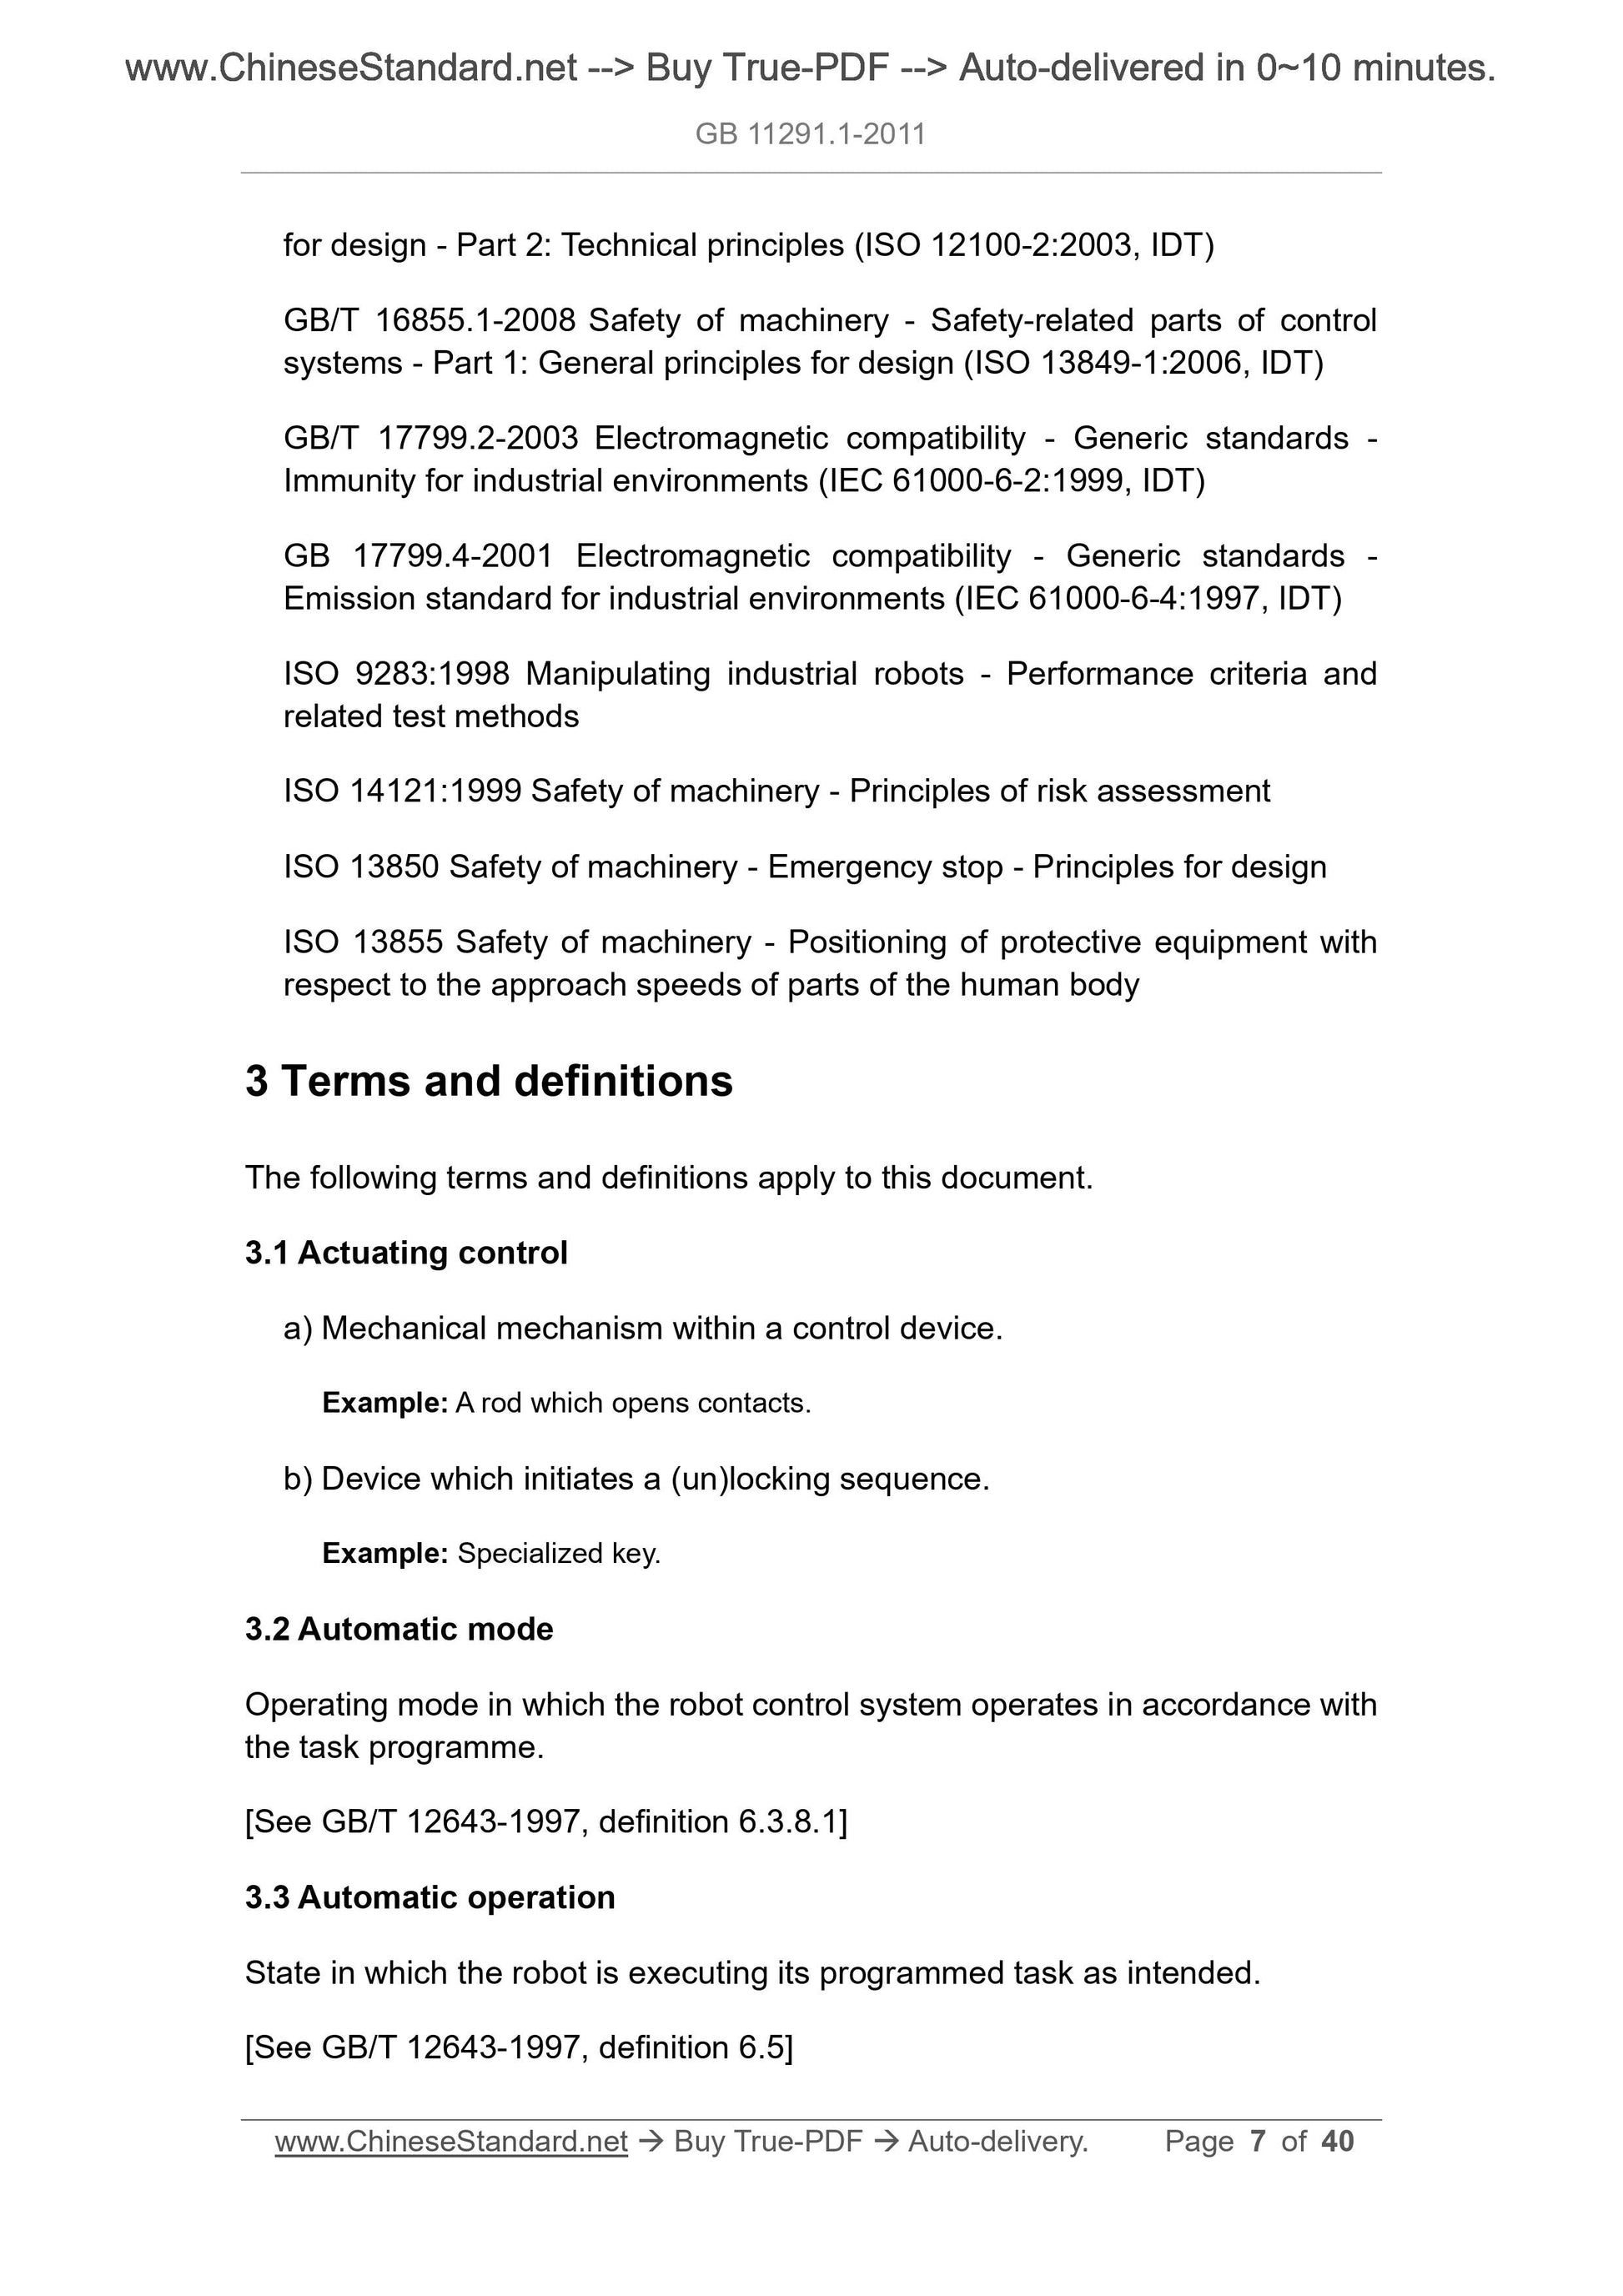 GB 11291.1-2011 Page 7